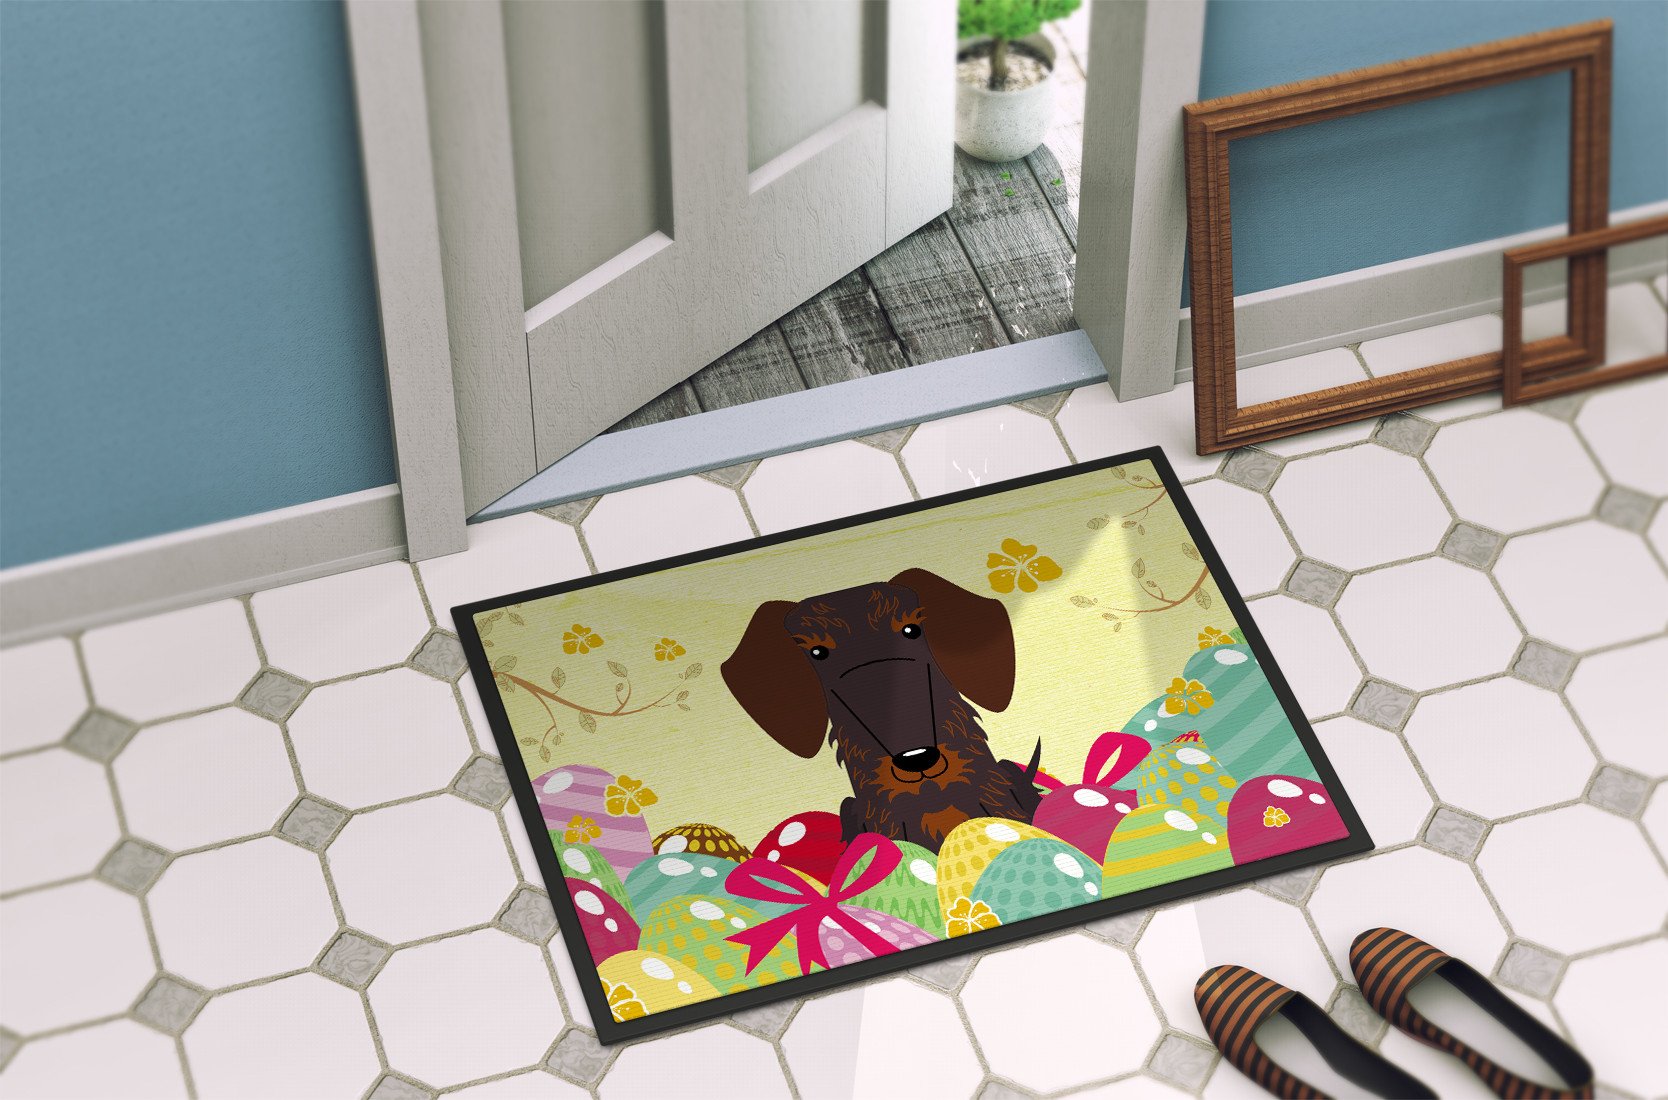 Easter Eggs Wire Haired Dachshund Chocolate Indoor or Outdoor Mat 24x36 BB6129JMAT by Caroline's Treasures